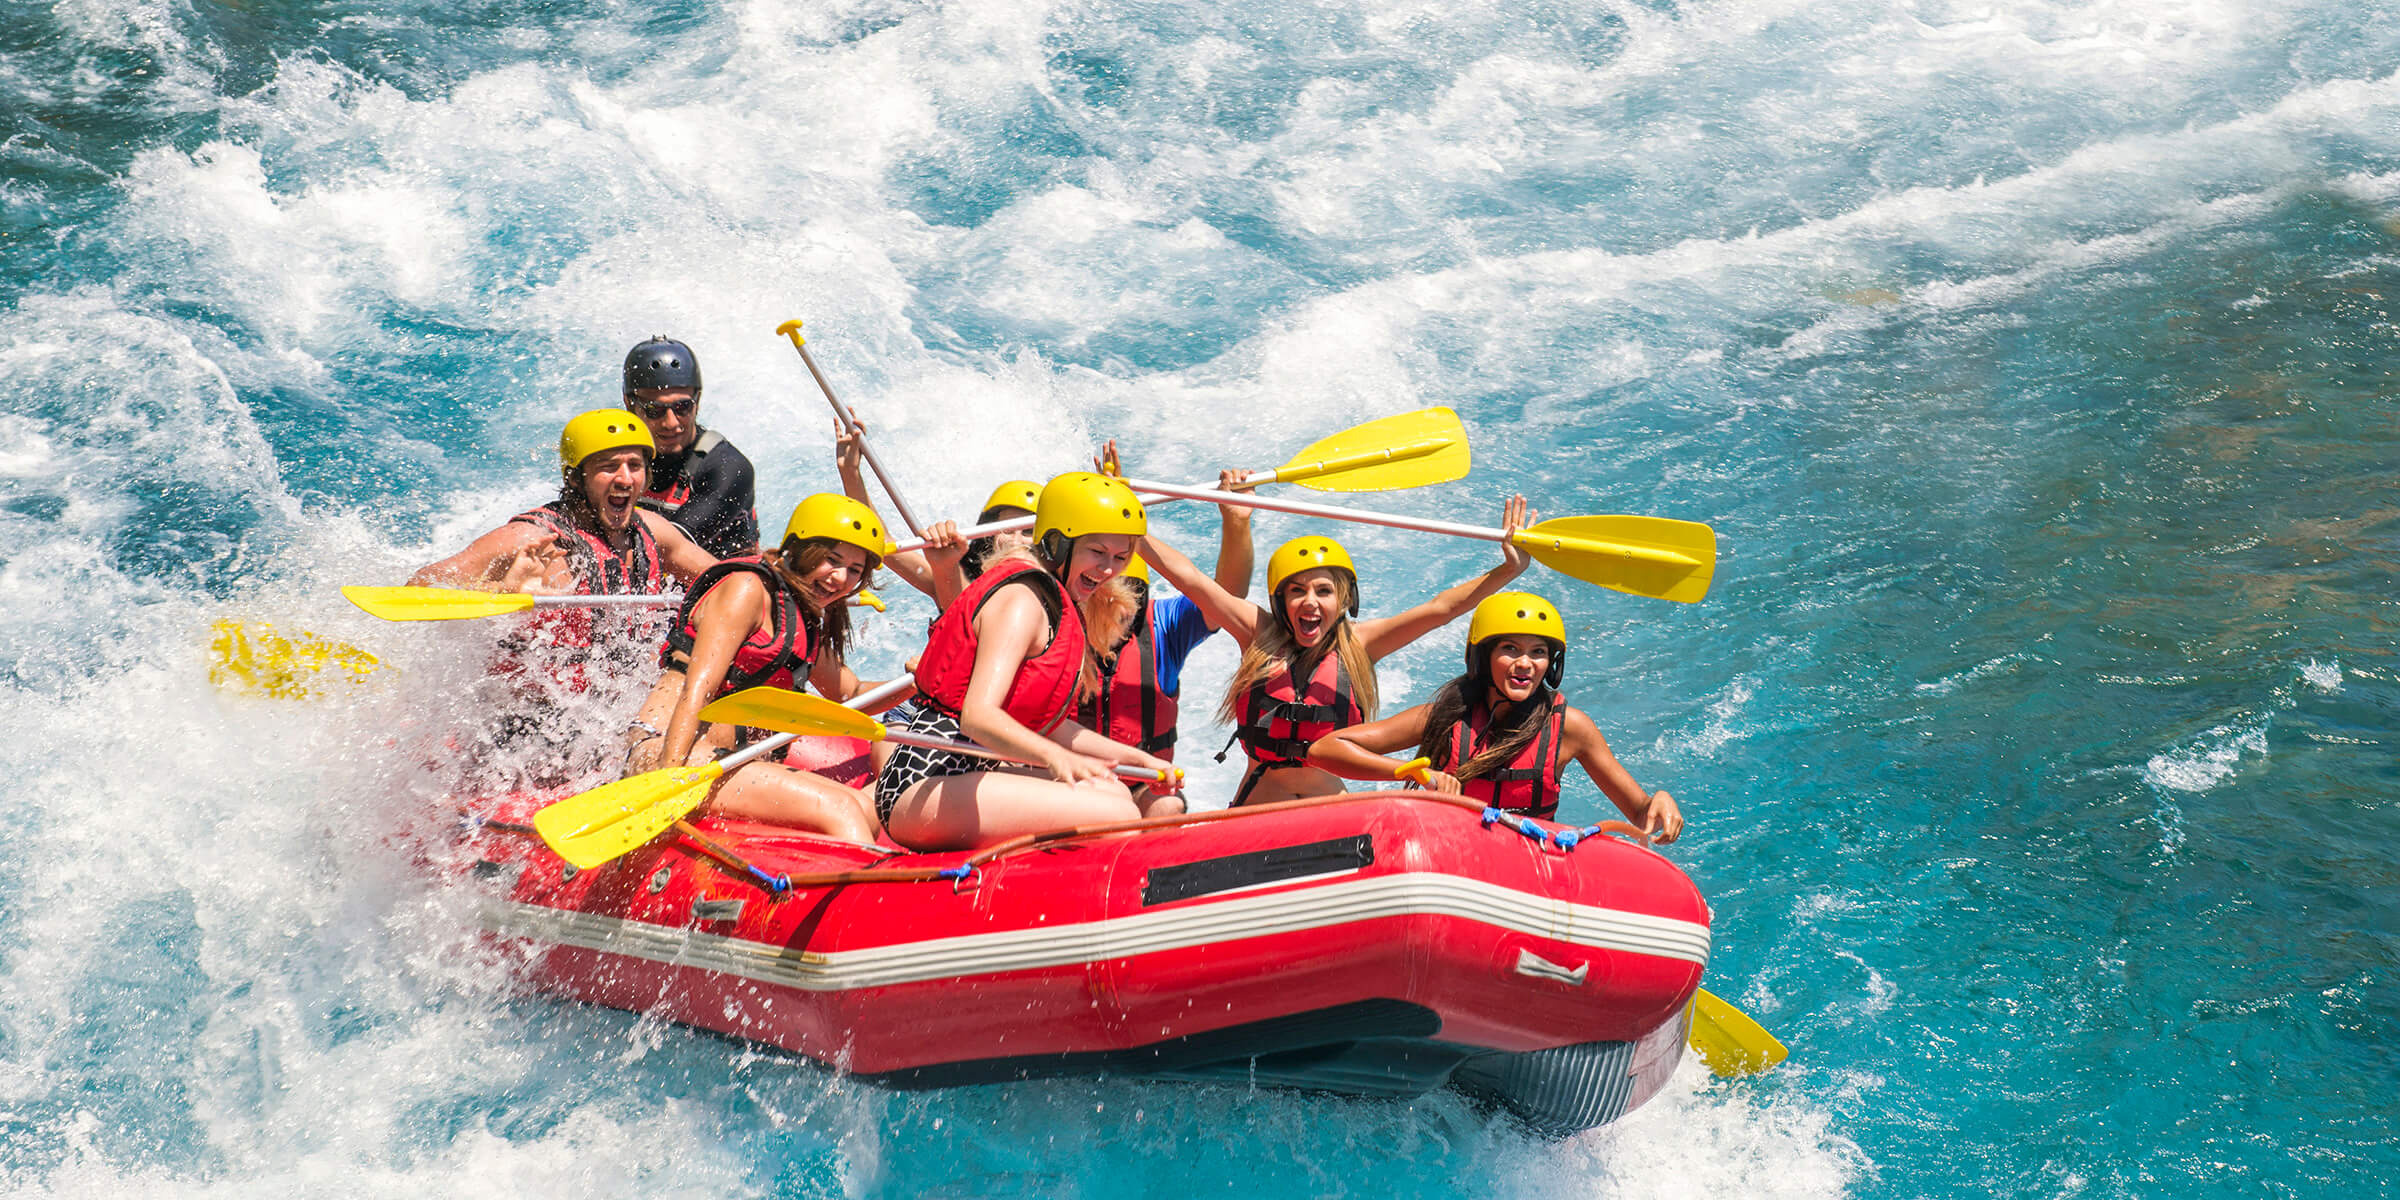 Rafting: Whitewater boating activity, An extreme water sports discipline. 2400x1200 Dual Screen Background.